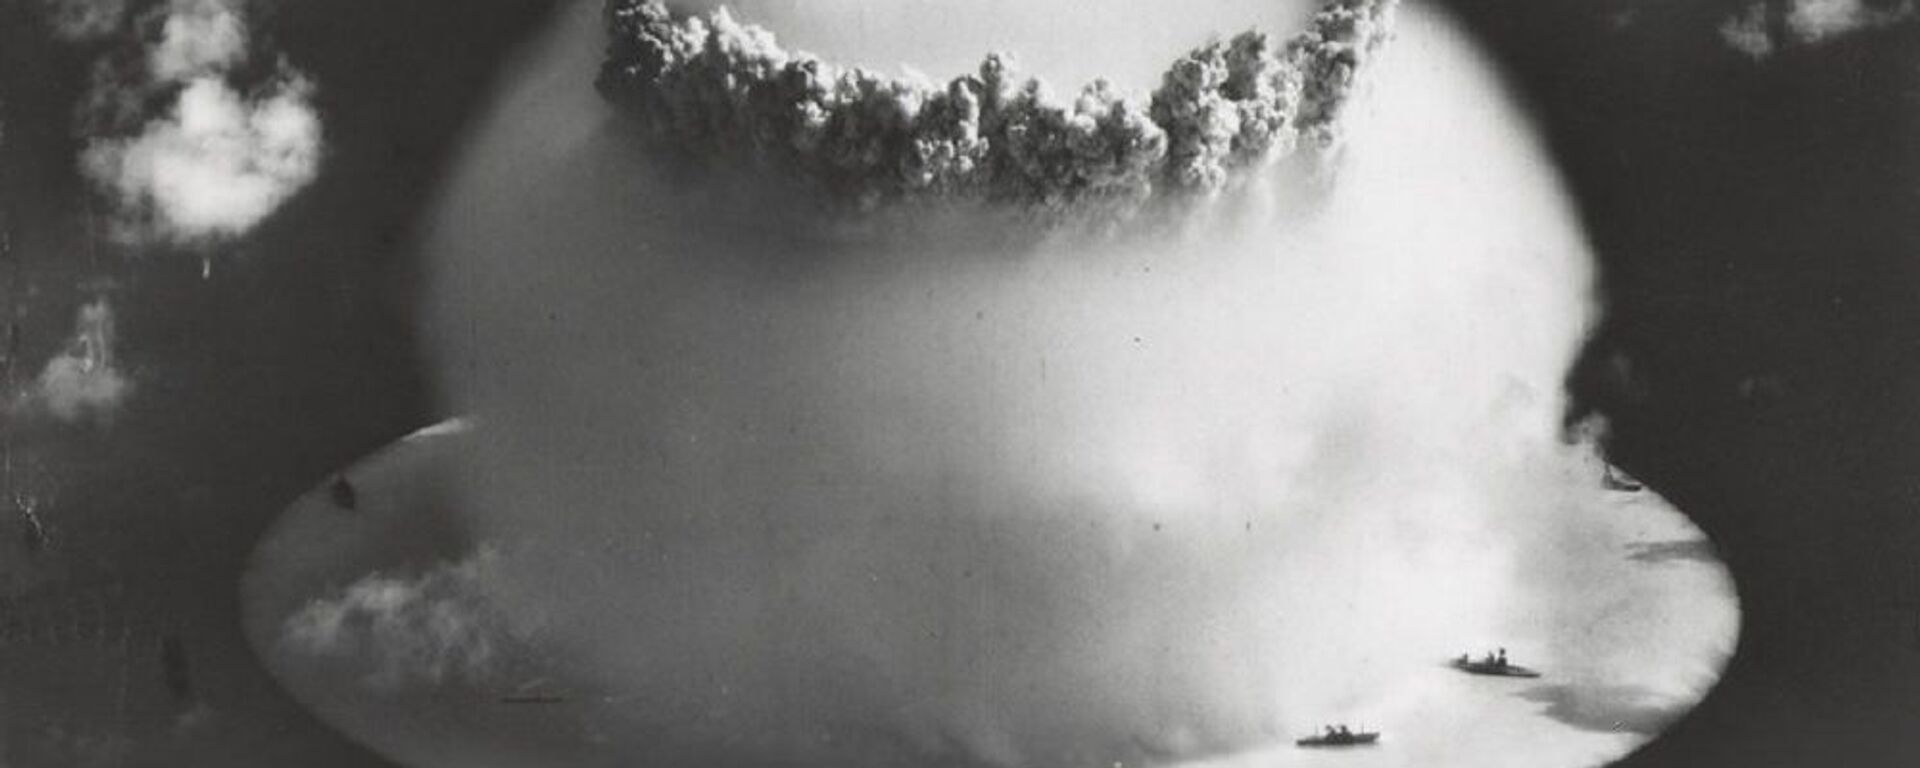 A 21 kiloton underwater nuclear weapons effects test, known as Operation CROSSROADS (Event Baker), conducted at Bikini Atoll (1946) - اسپوتنیک افغانستان  , 1920, 20.10.2023